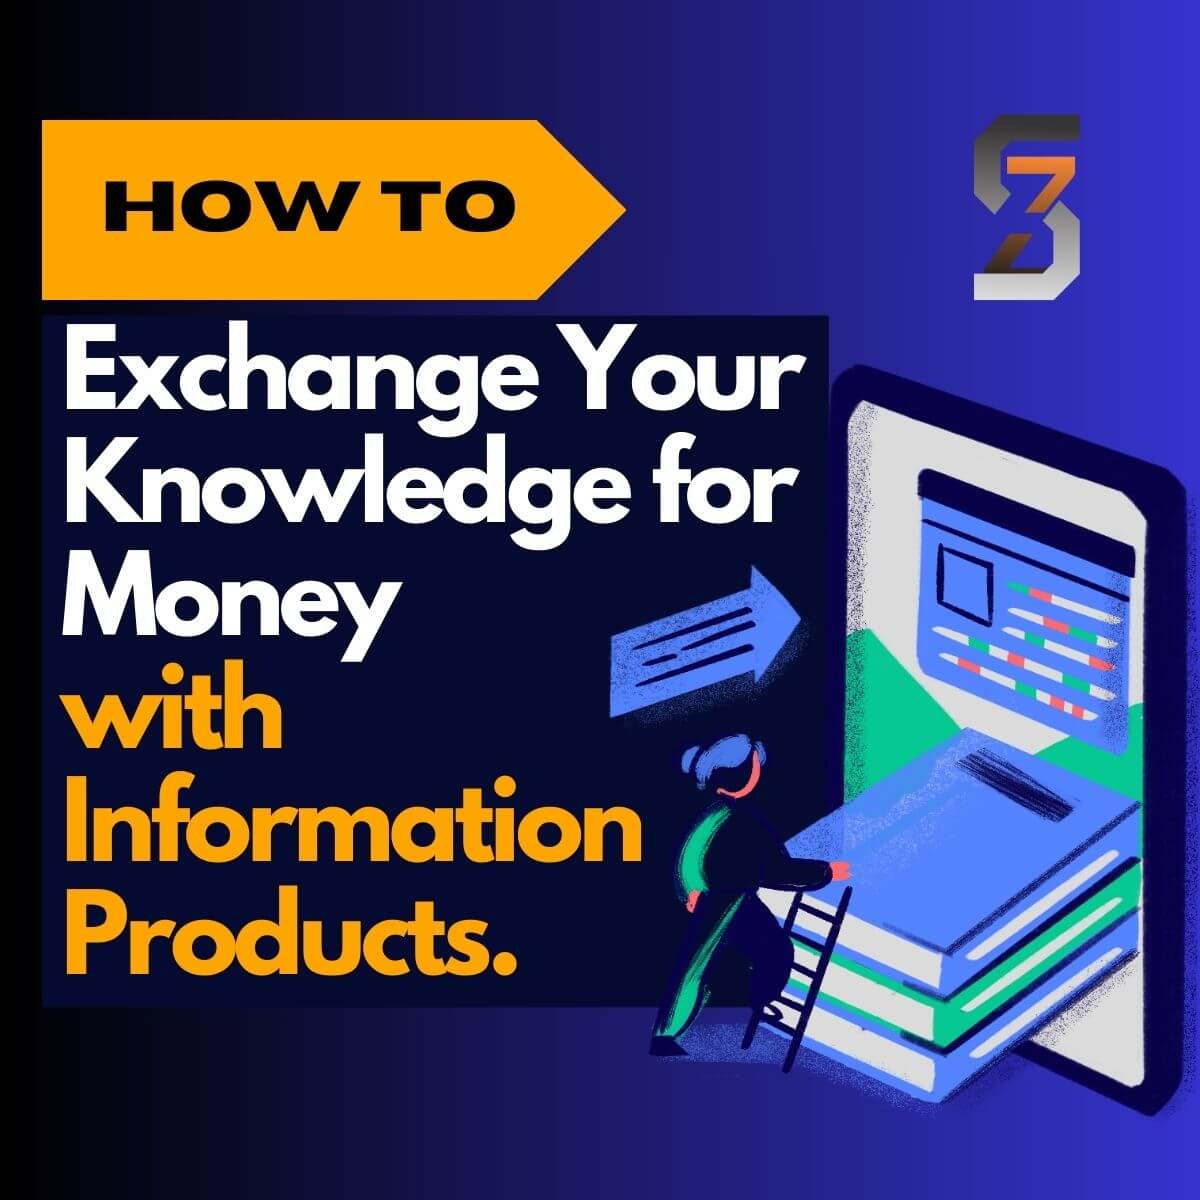 Echange your knowledge for information product